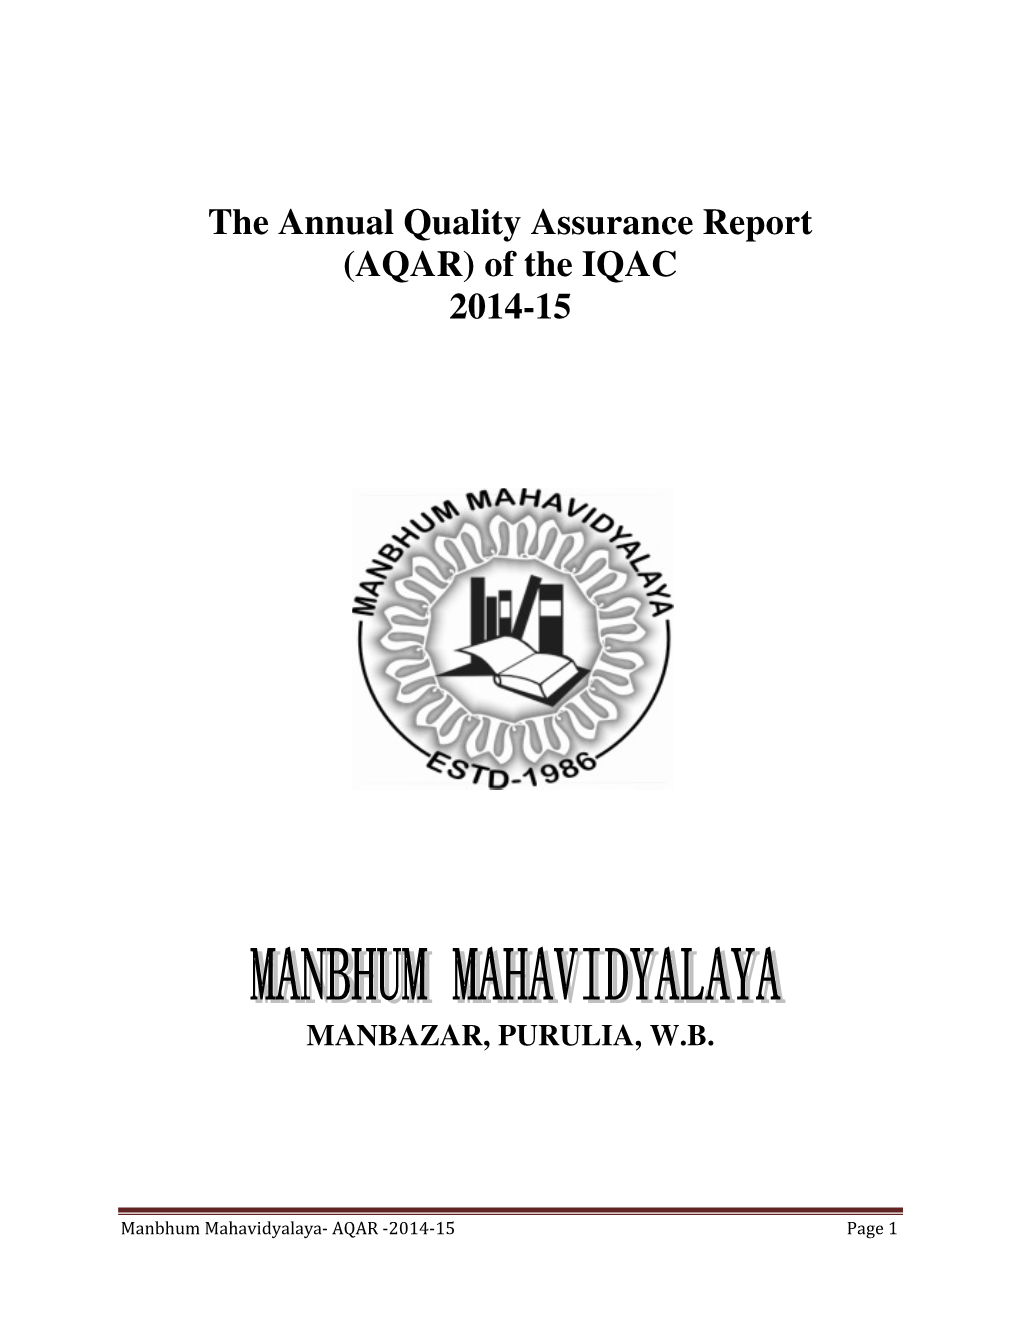 The Annual Quality Assurance Report (AQAR) of the IQAC 2014-15